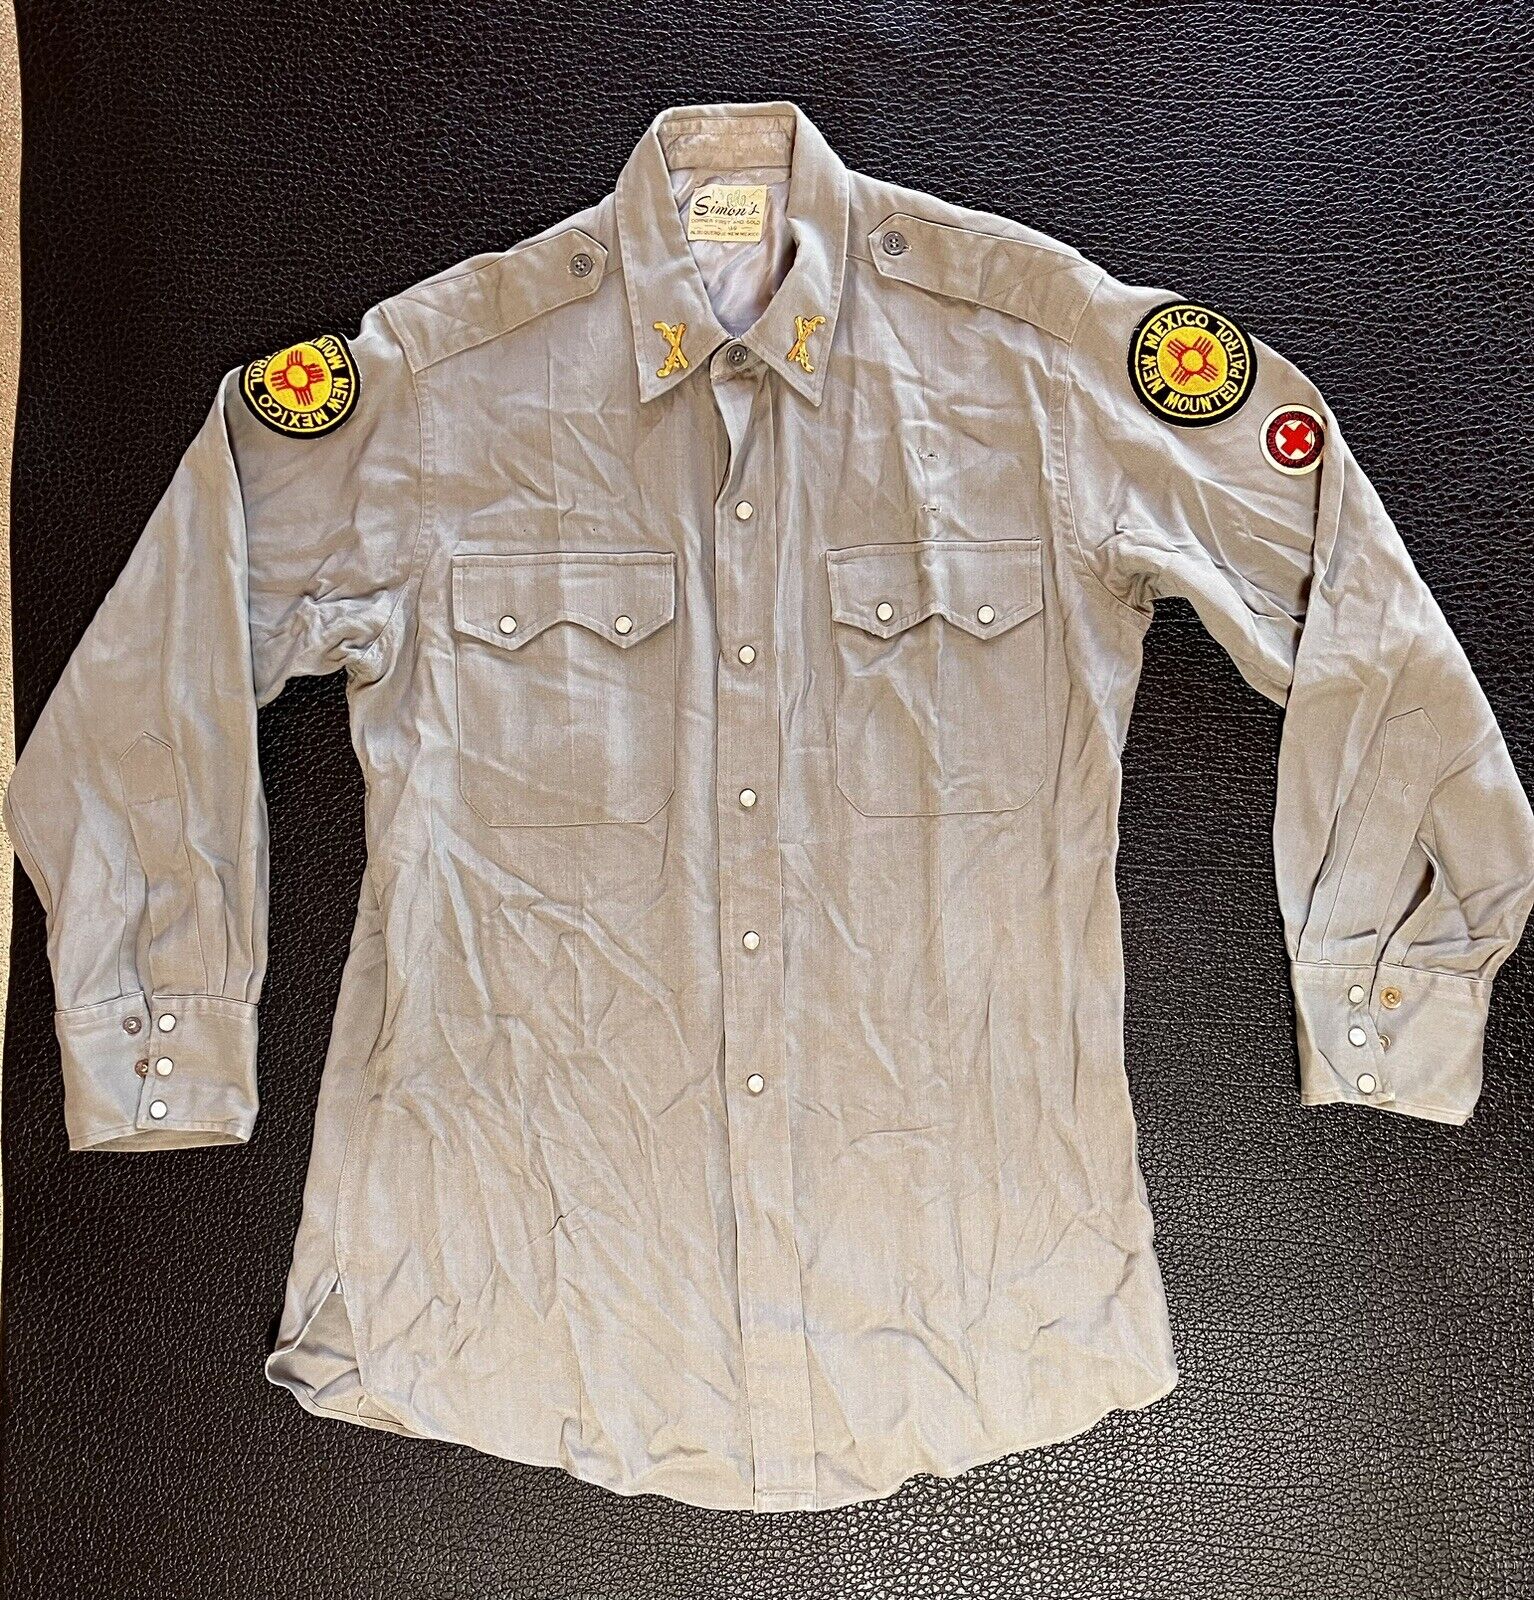 VINTAGE 1940s NEW MEXICO MOUNTED PATROL POLICE Uniform Shirt Pearl Snap OBSOLETE